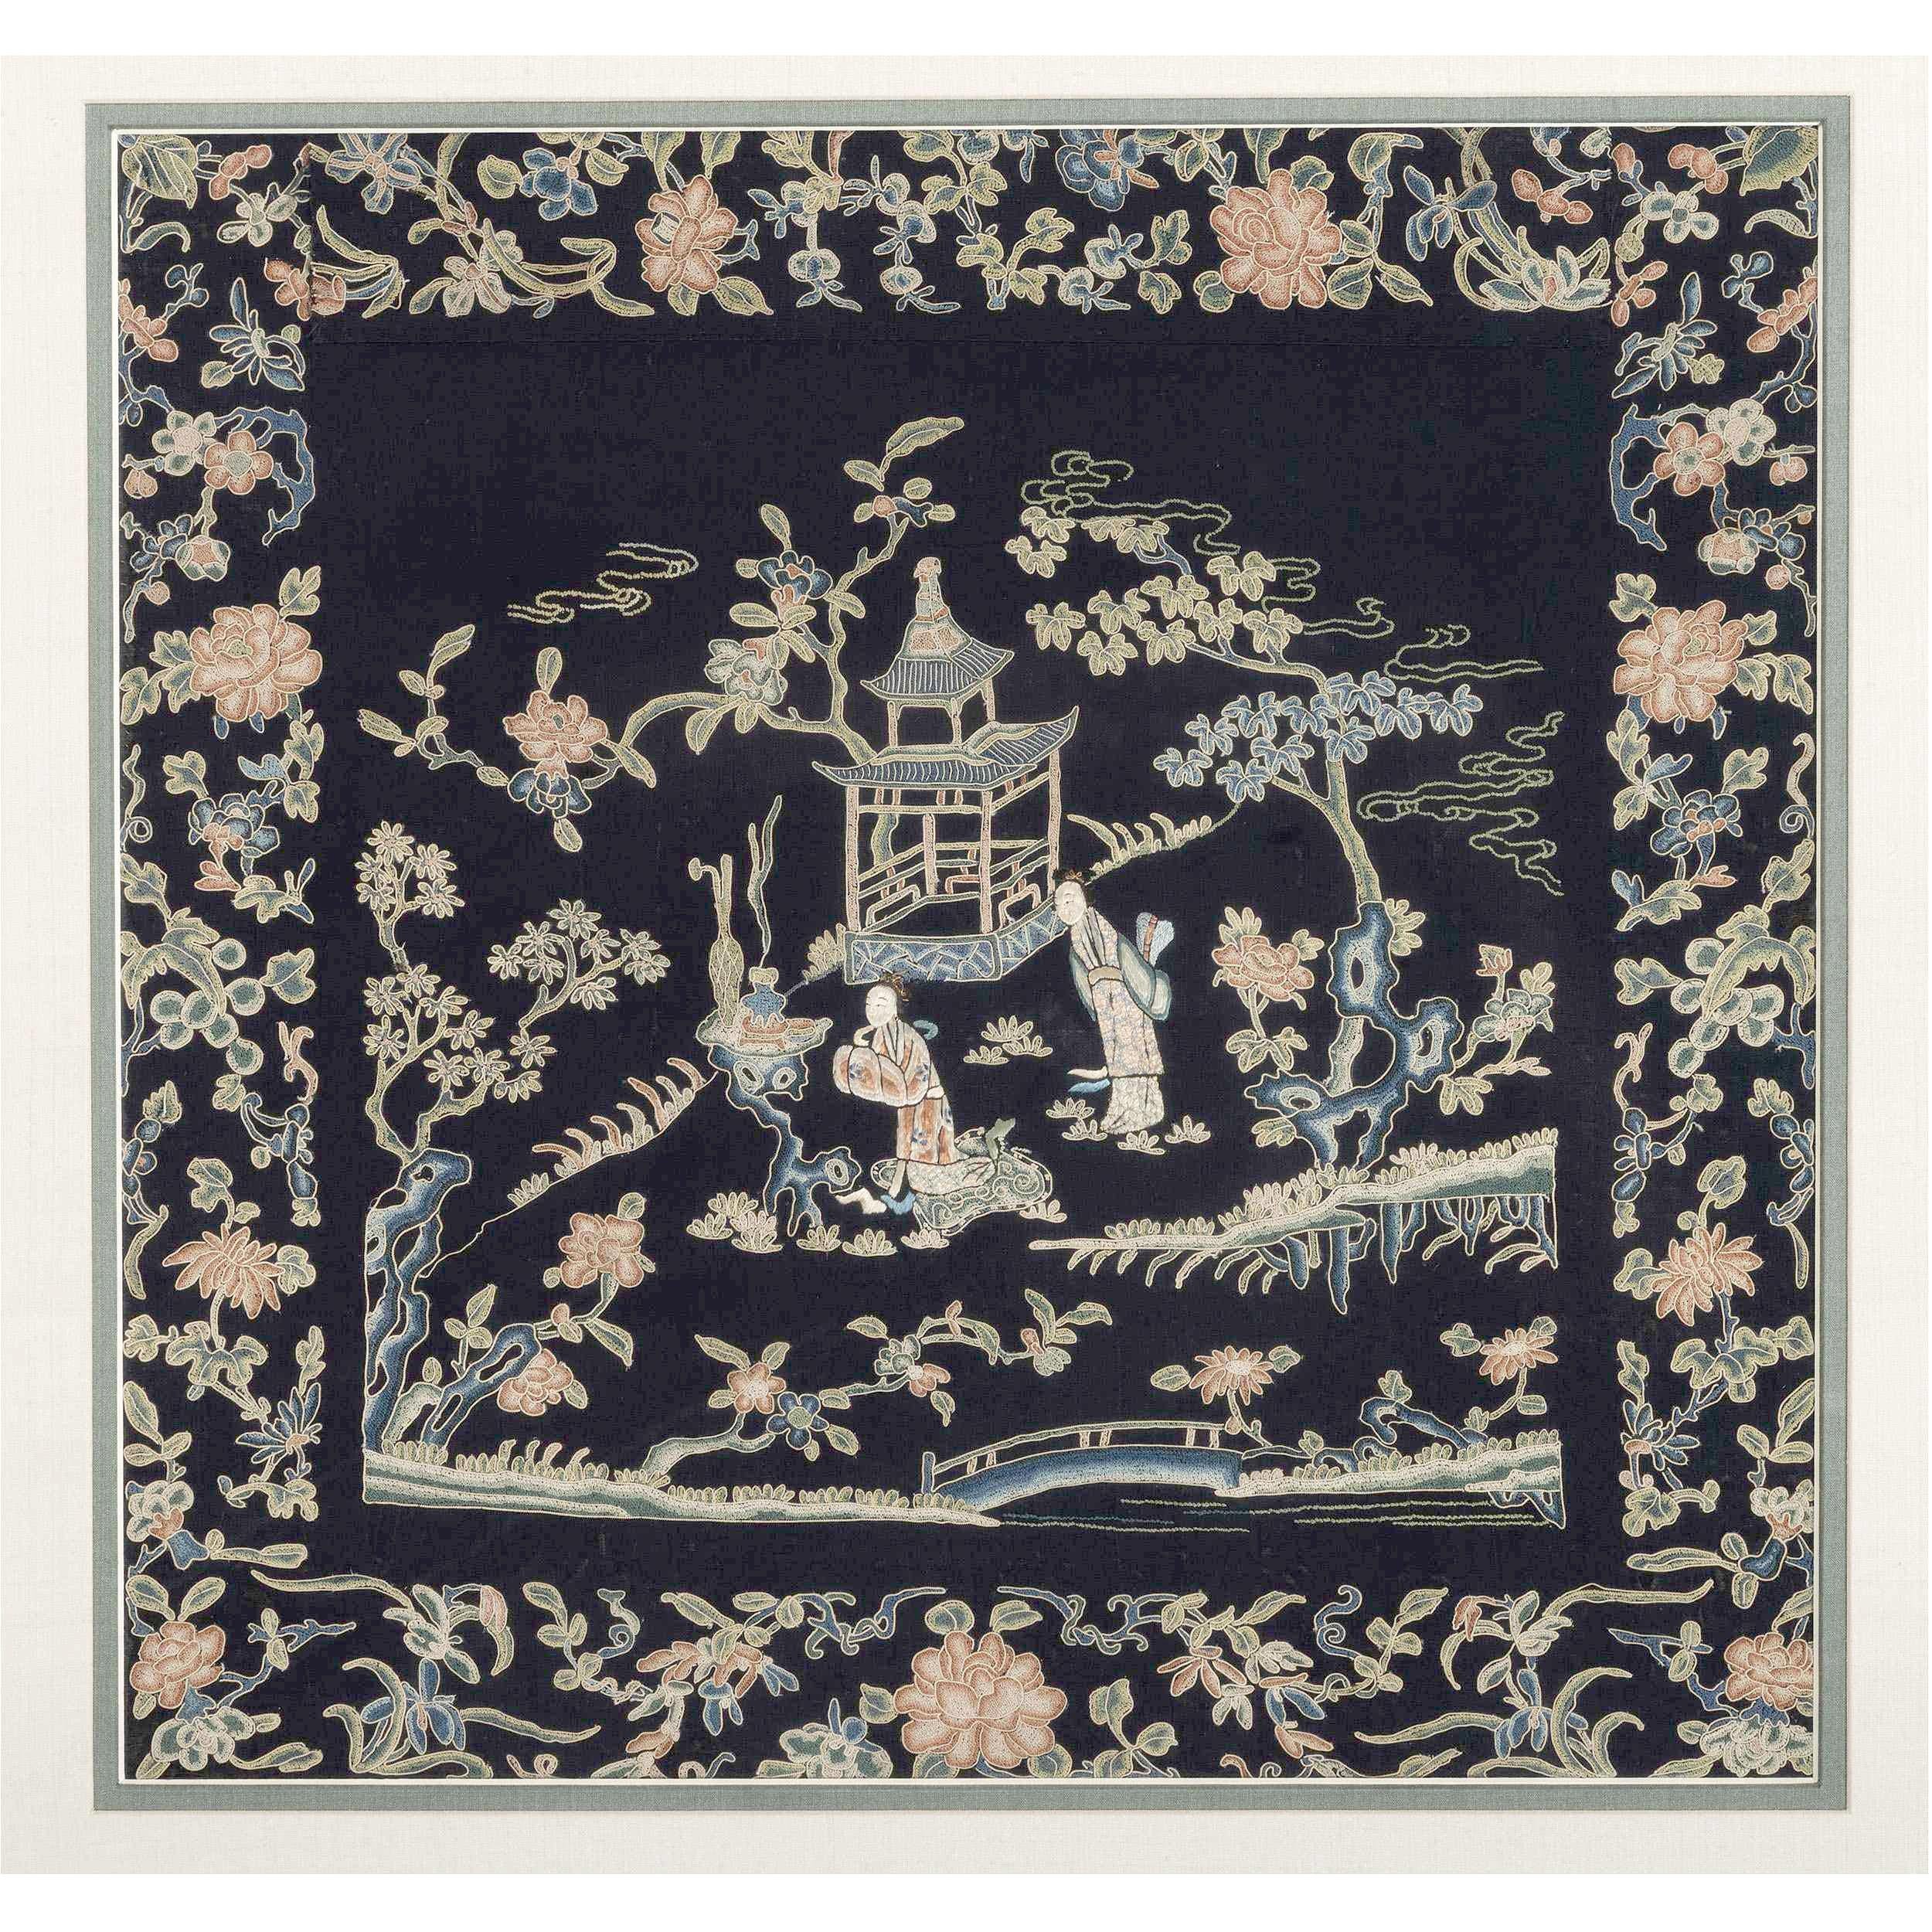 A spectacular antique Chinese embroidery panel dated from Qing dynasty (circa 19th century), professionally framed with linen mat, purchased from Galerie Du Monde in Hong Kong. This example, entailed with many stitch techniques including, satin,